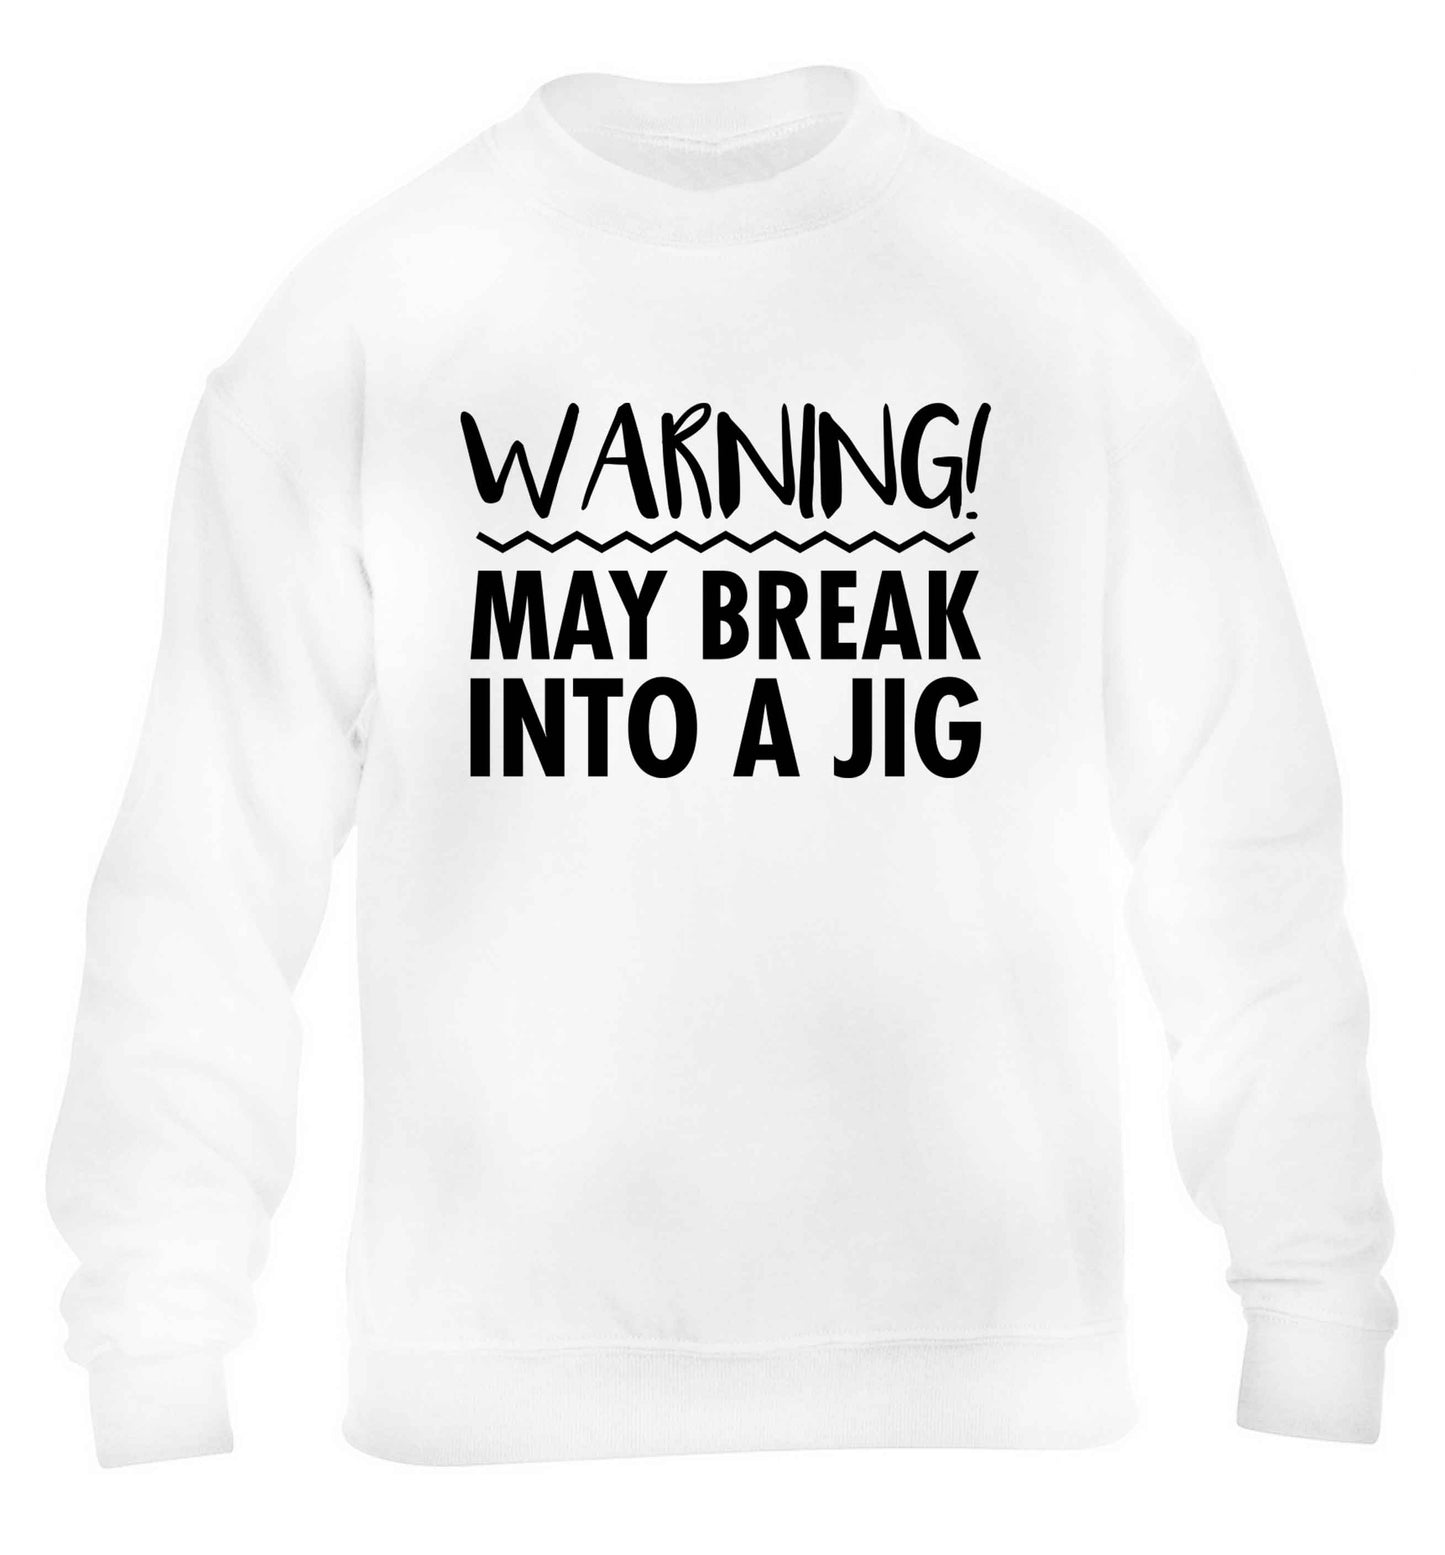 Warning may break into a jig children's white sweater 12-13 Years